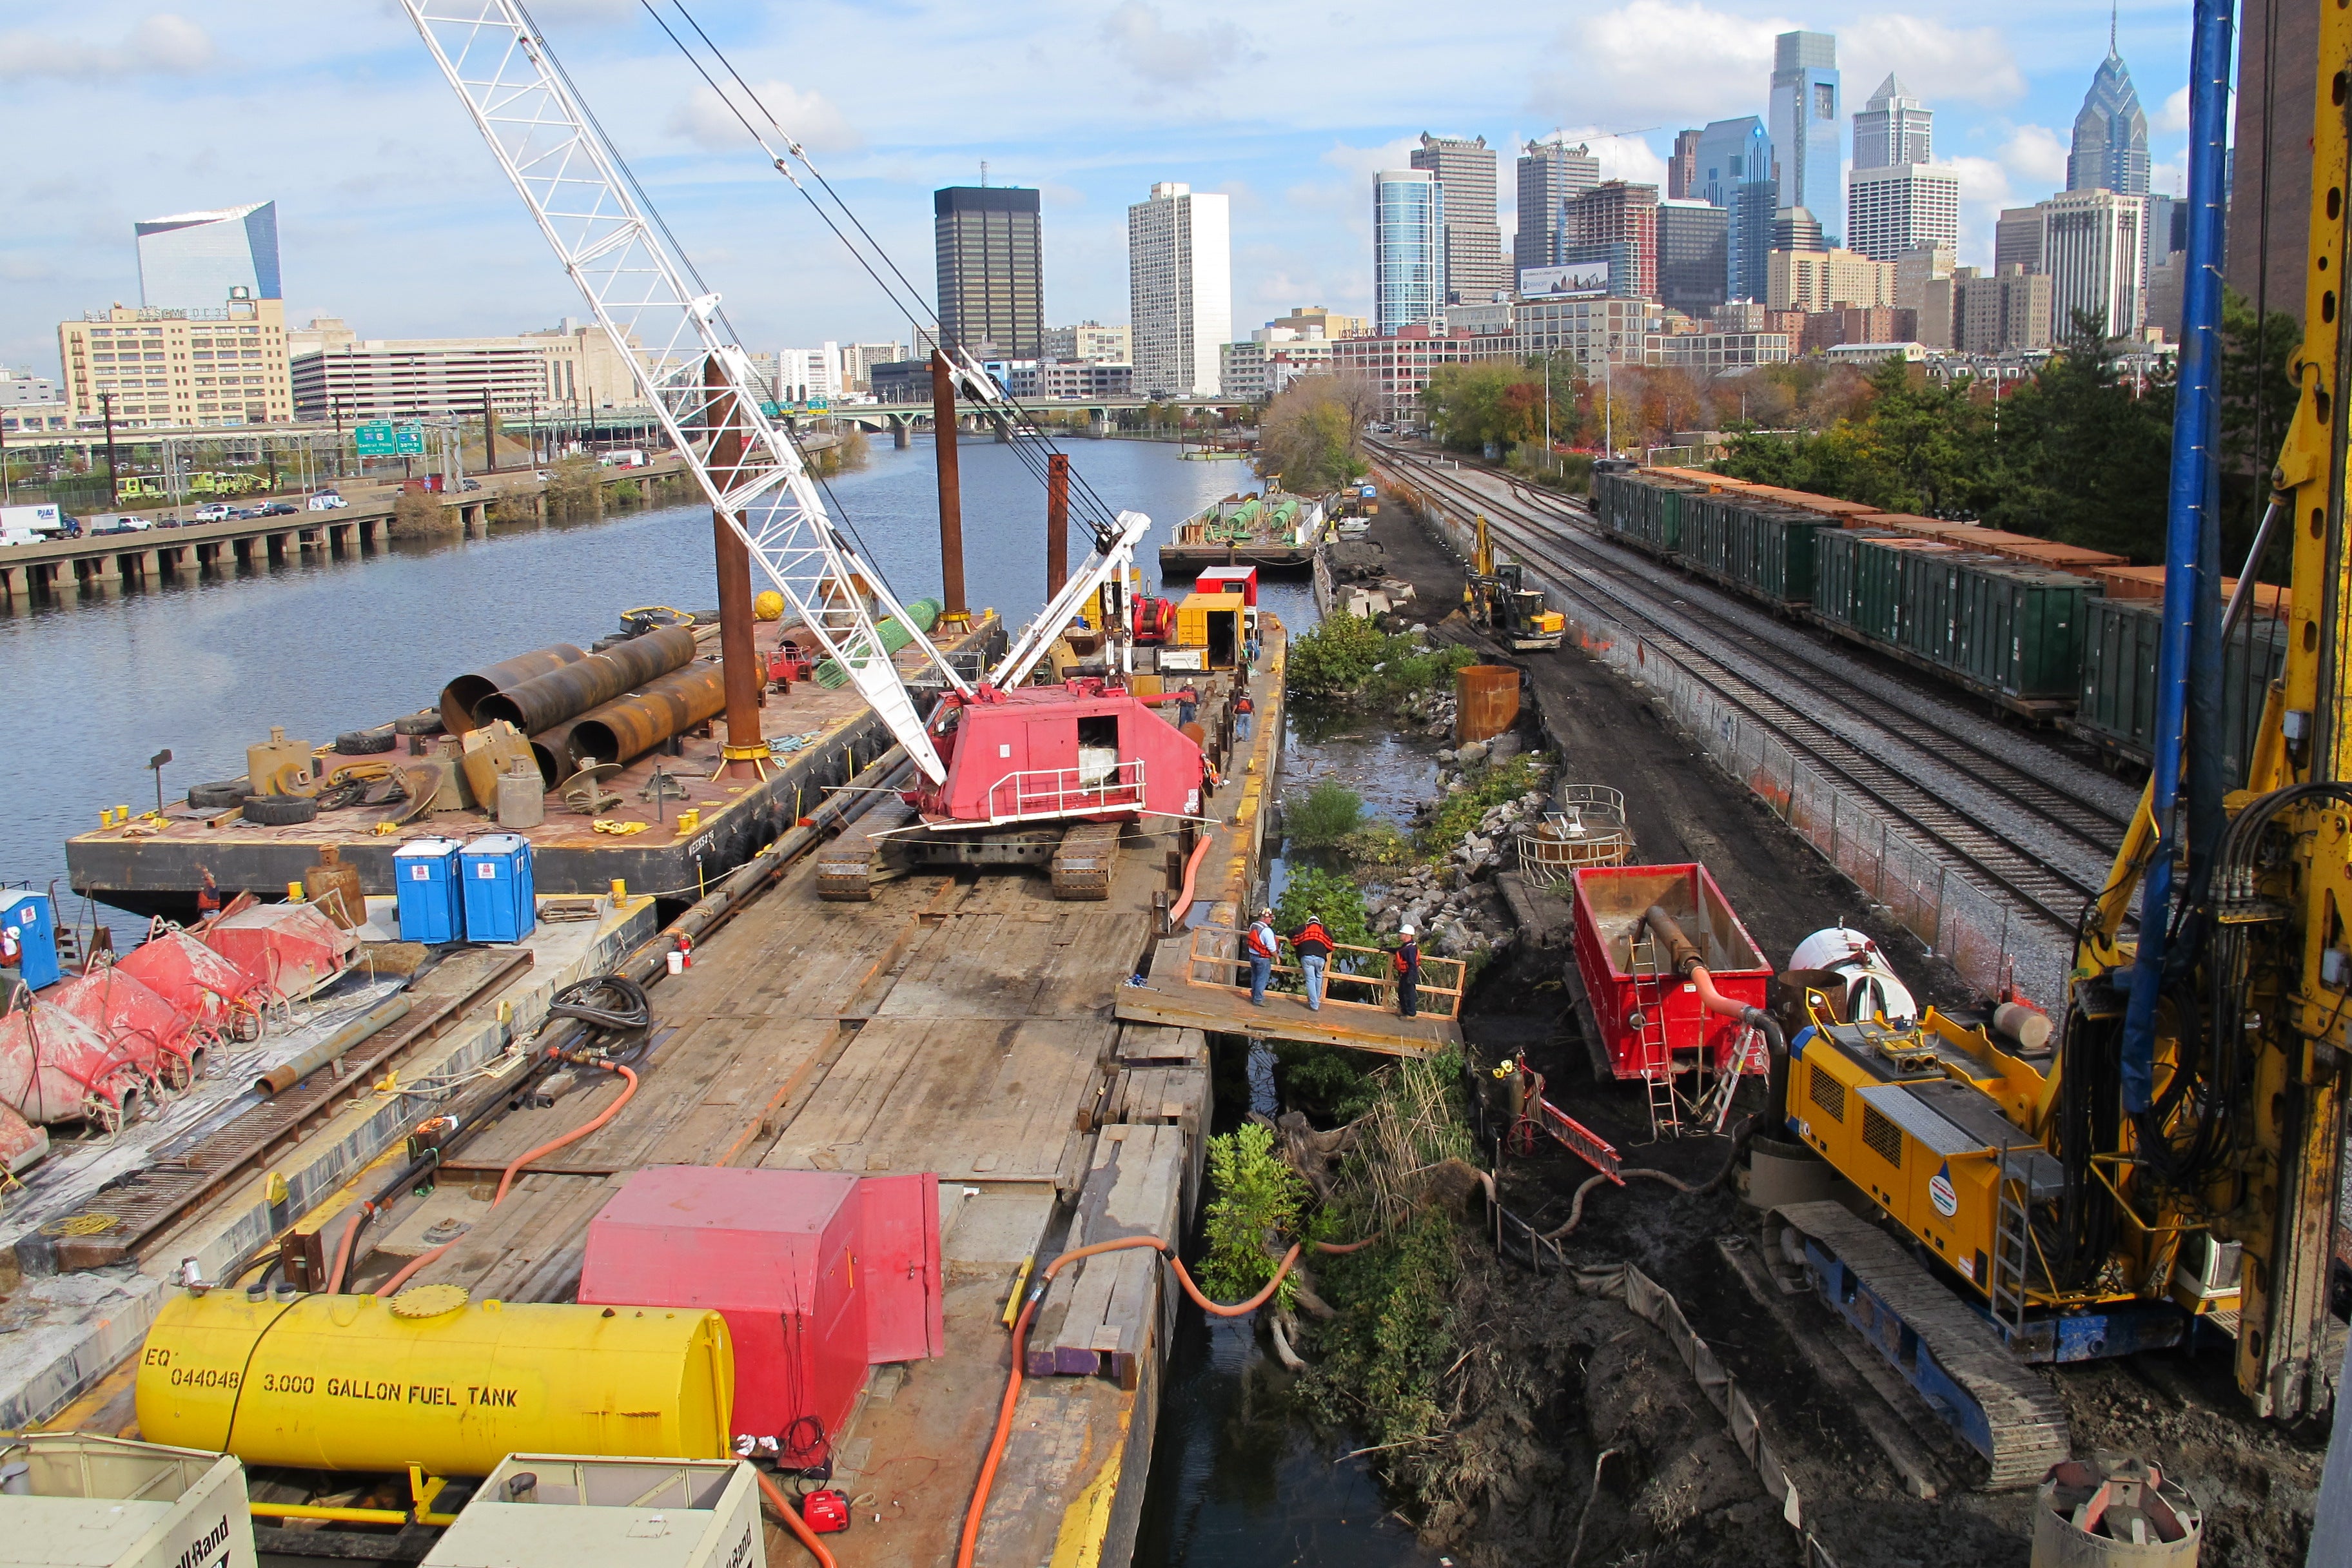 A section of boardwalk is under construction on the Schuylkill River to connect Schuylkill Banks to the South Street Bridge.